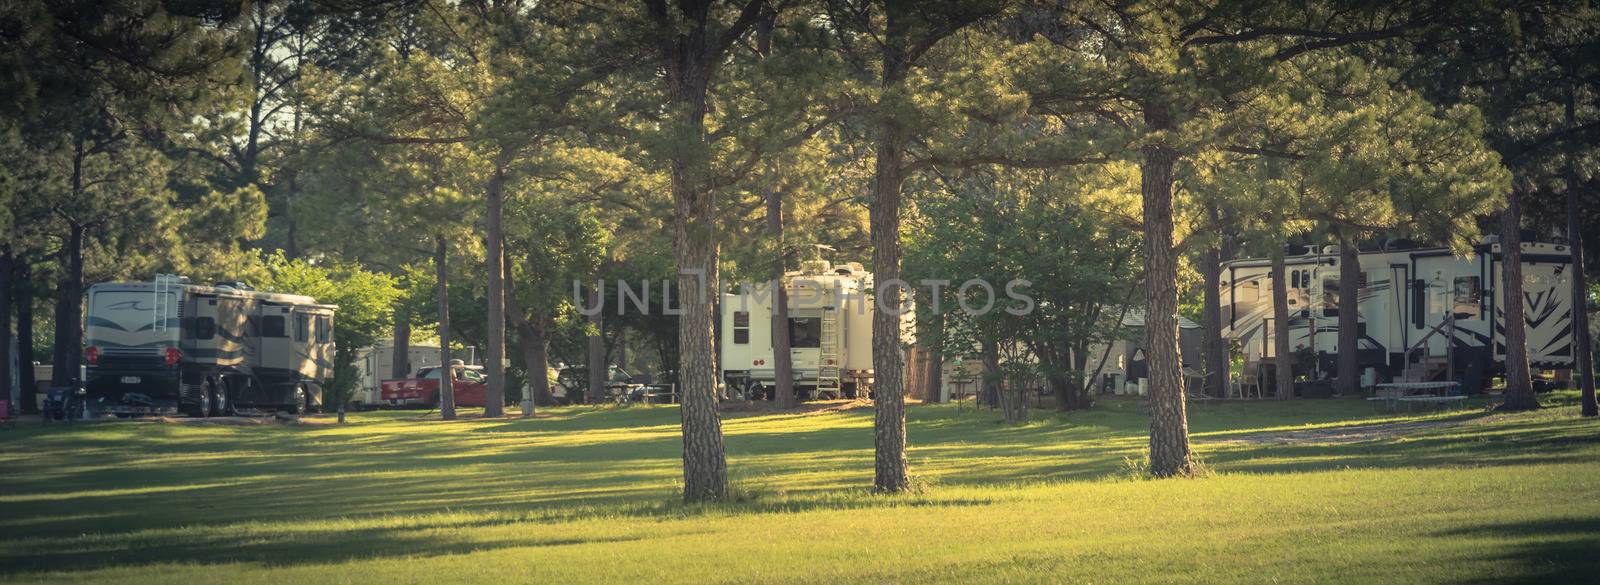 Panoramic view recreational vehicles RV and camper park near Dallas, Texas by trongnguyen